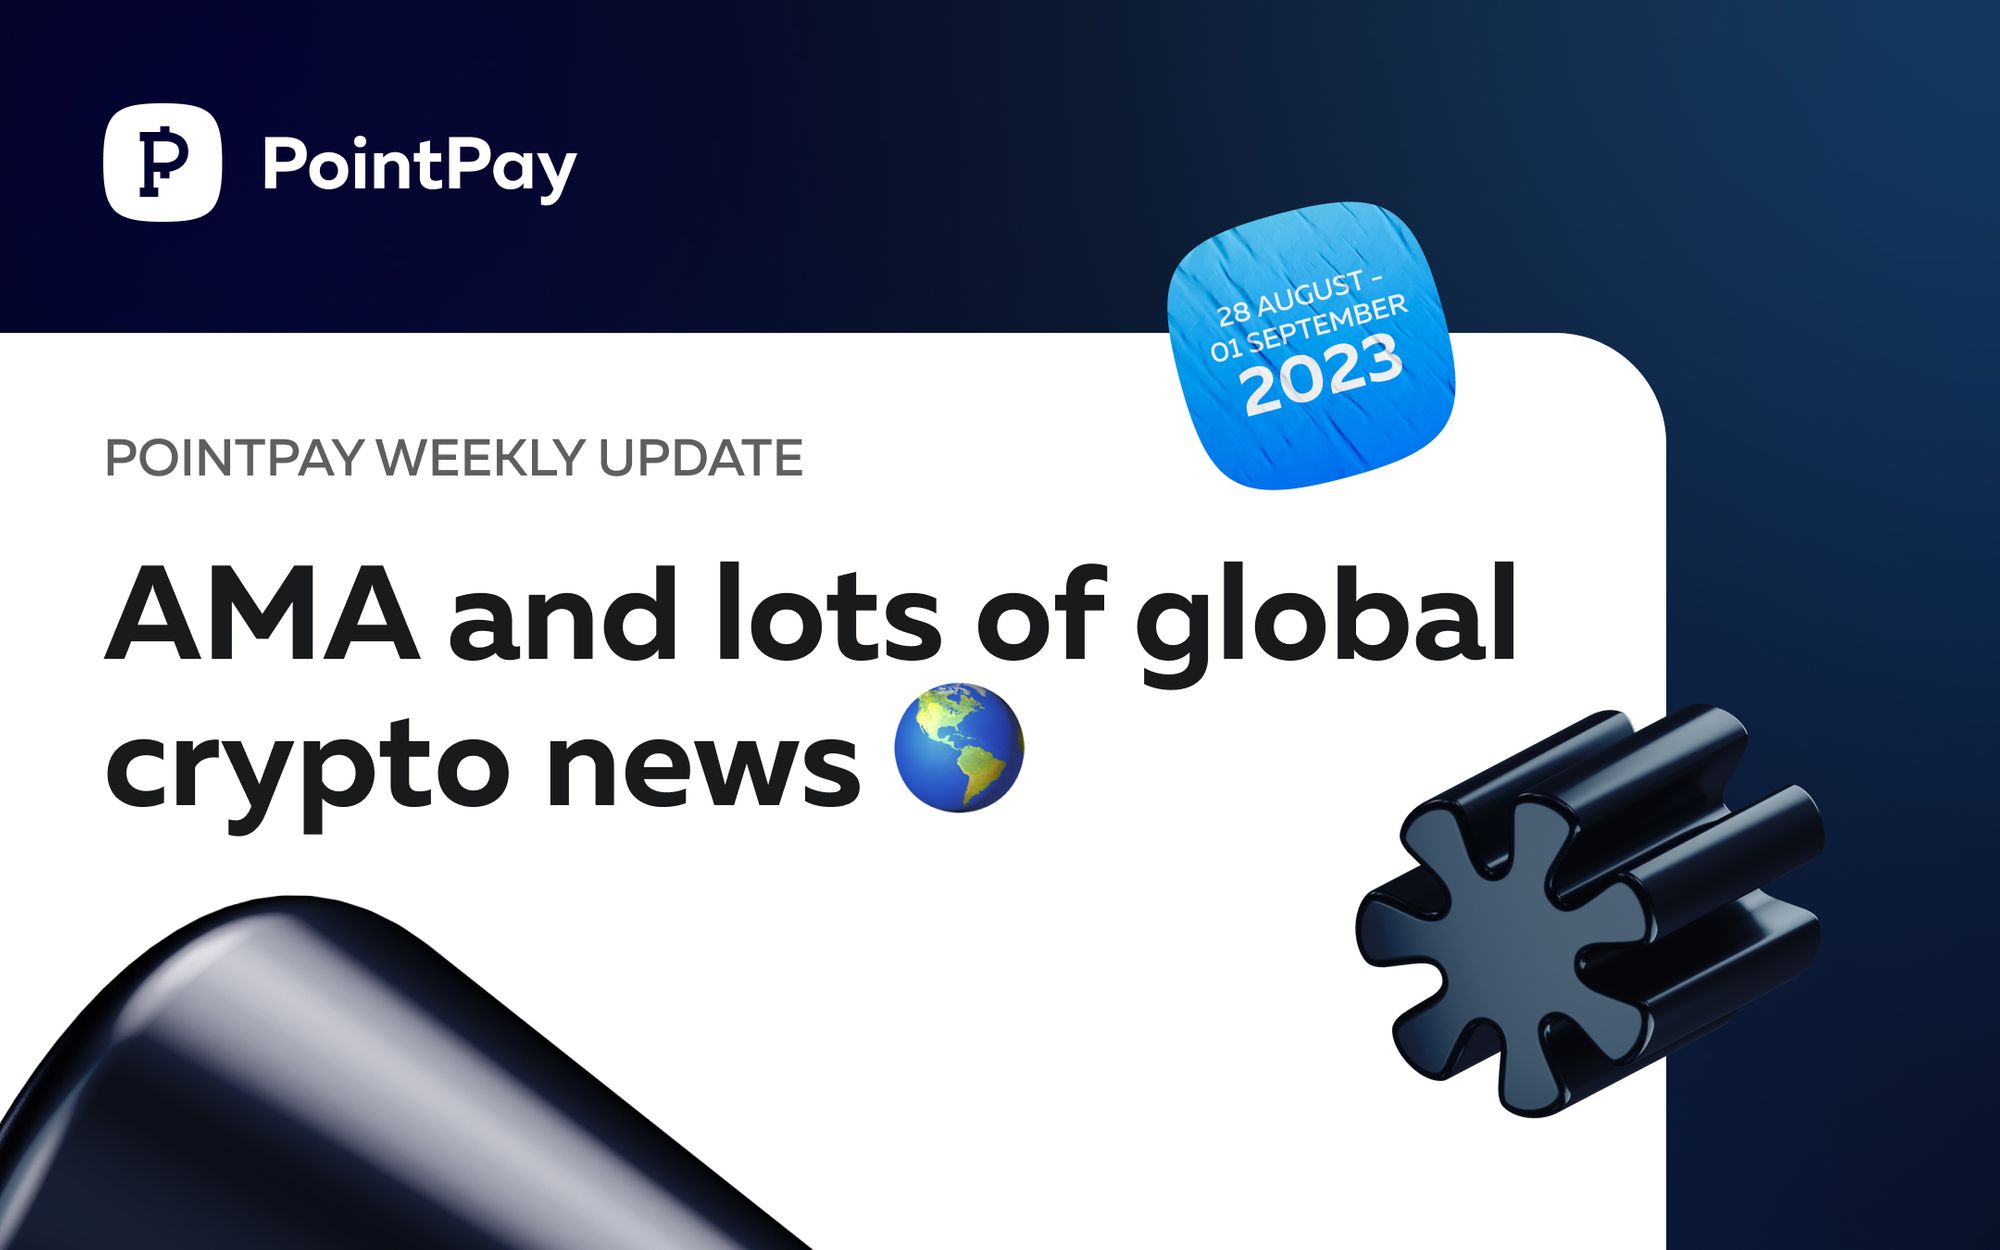 PointPay Weekly Update (28 August - 1 September 2023)